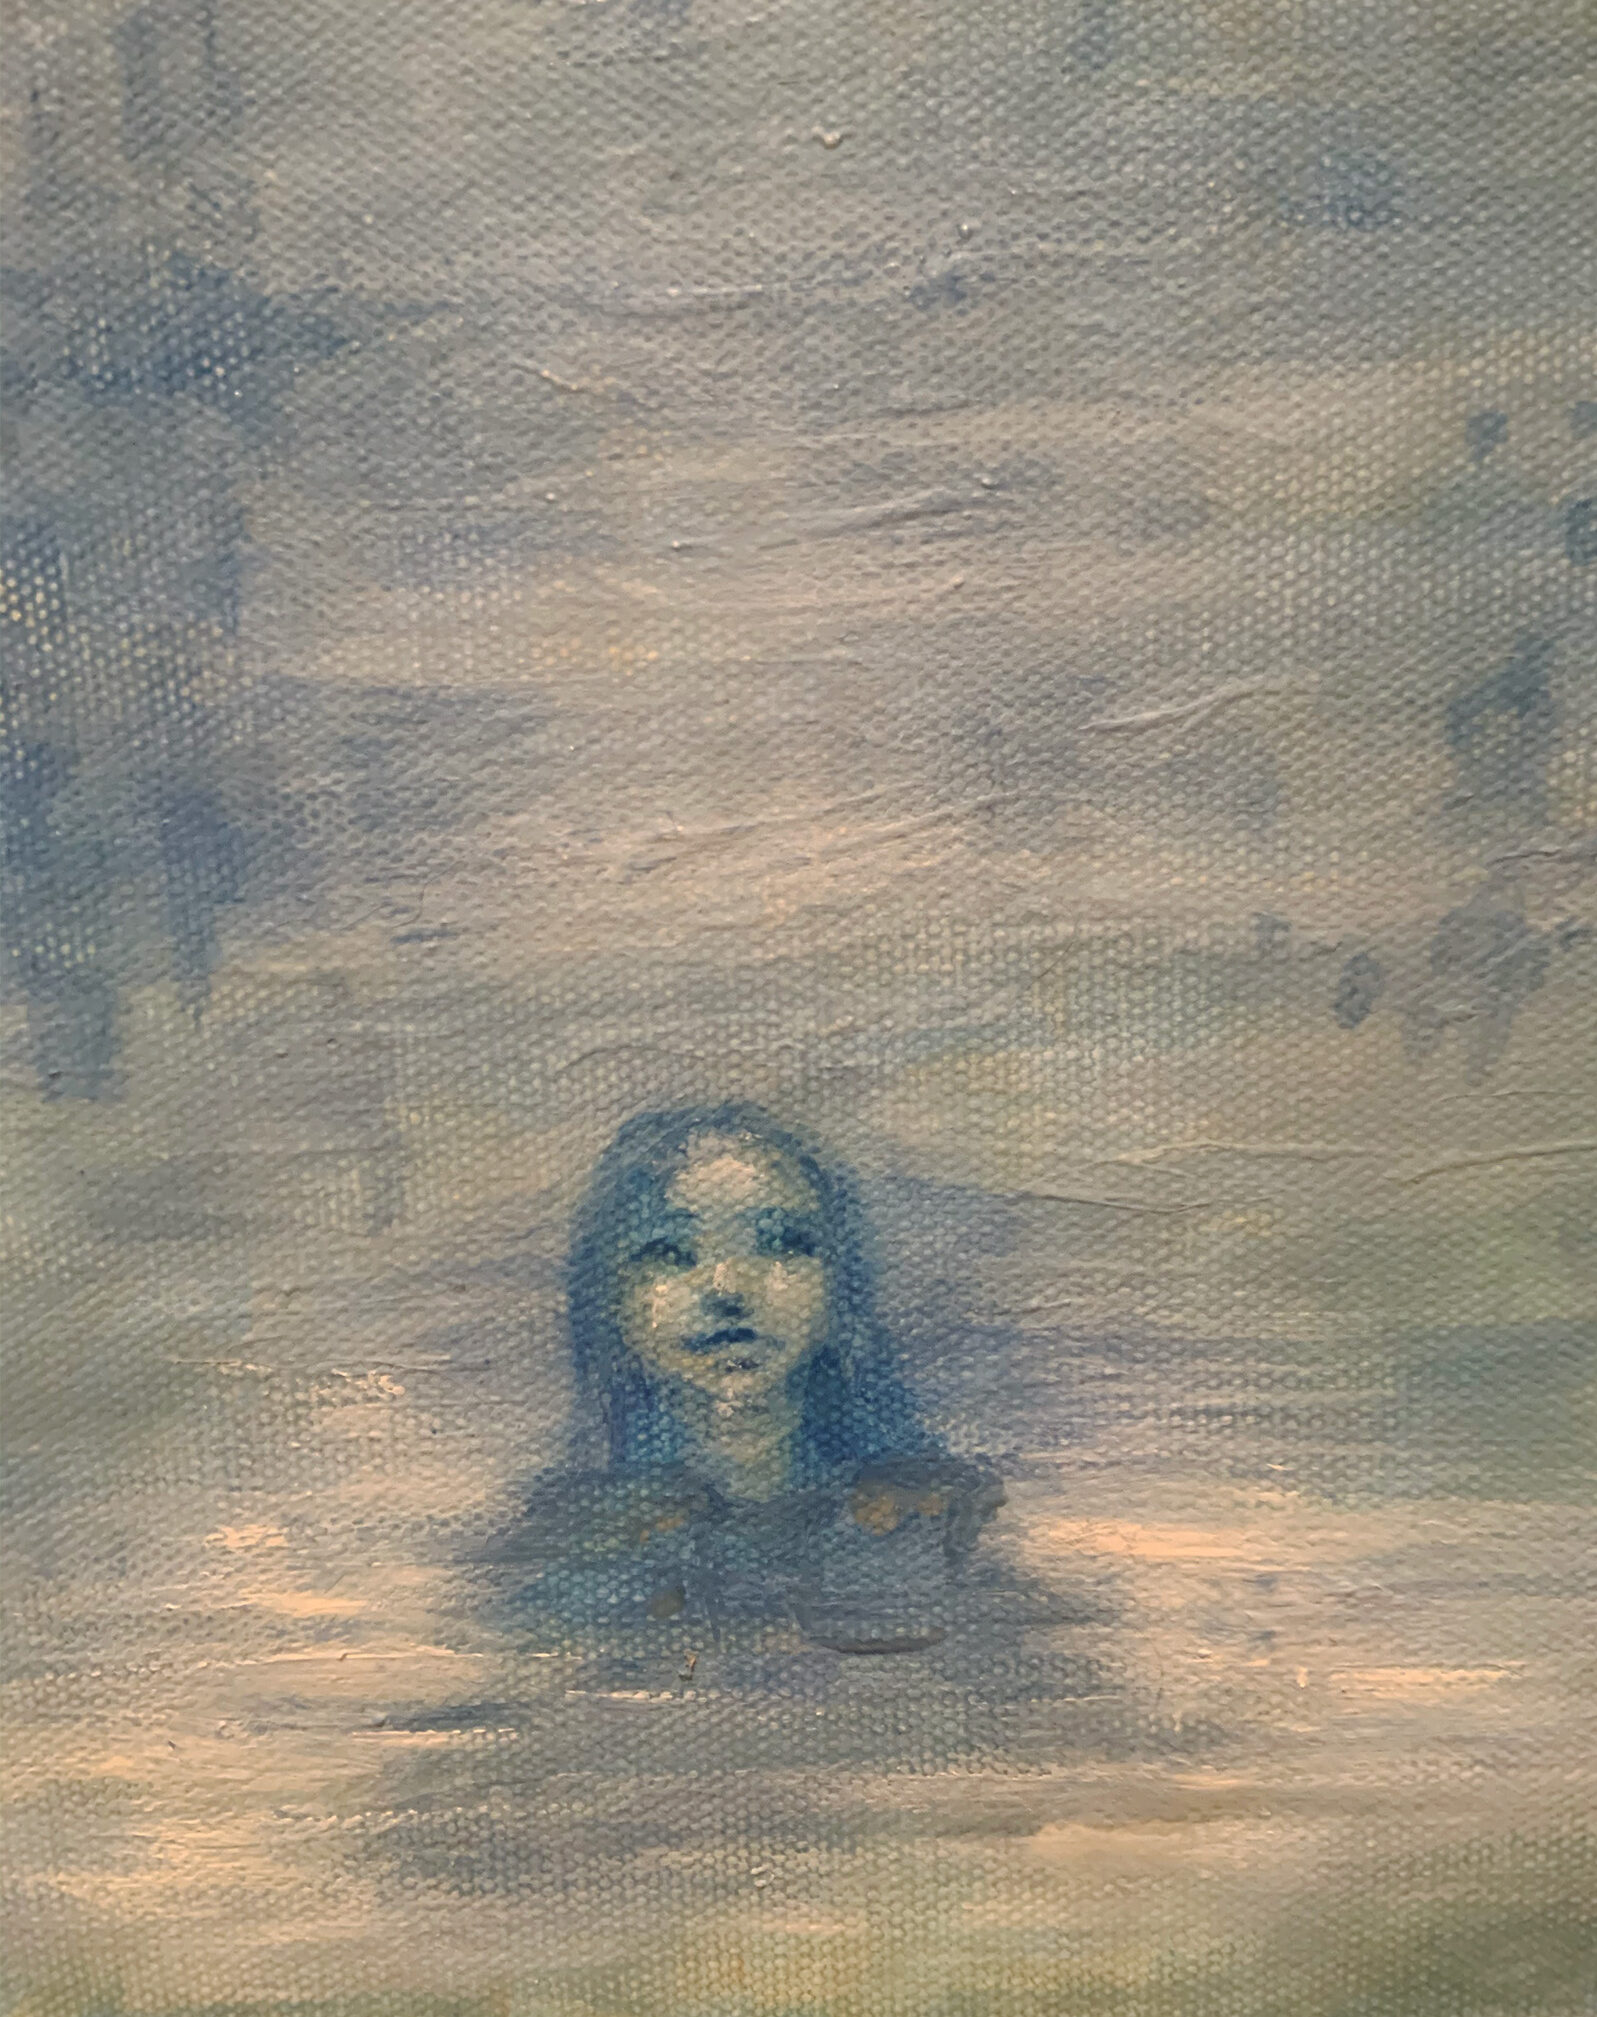 Painting of a girl in the sea done only with blue and white paint.